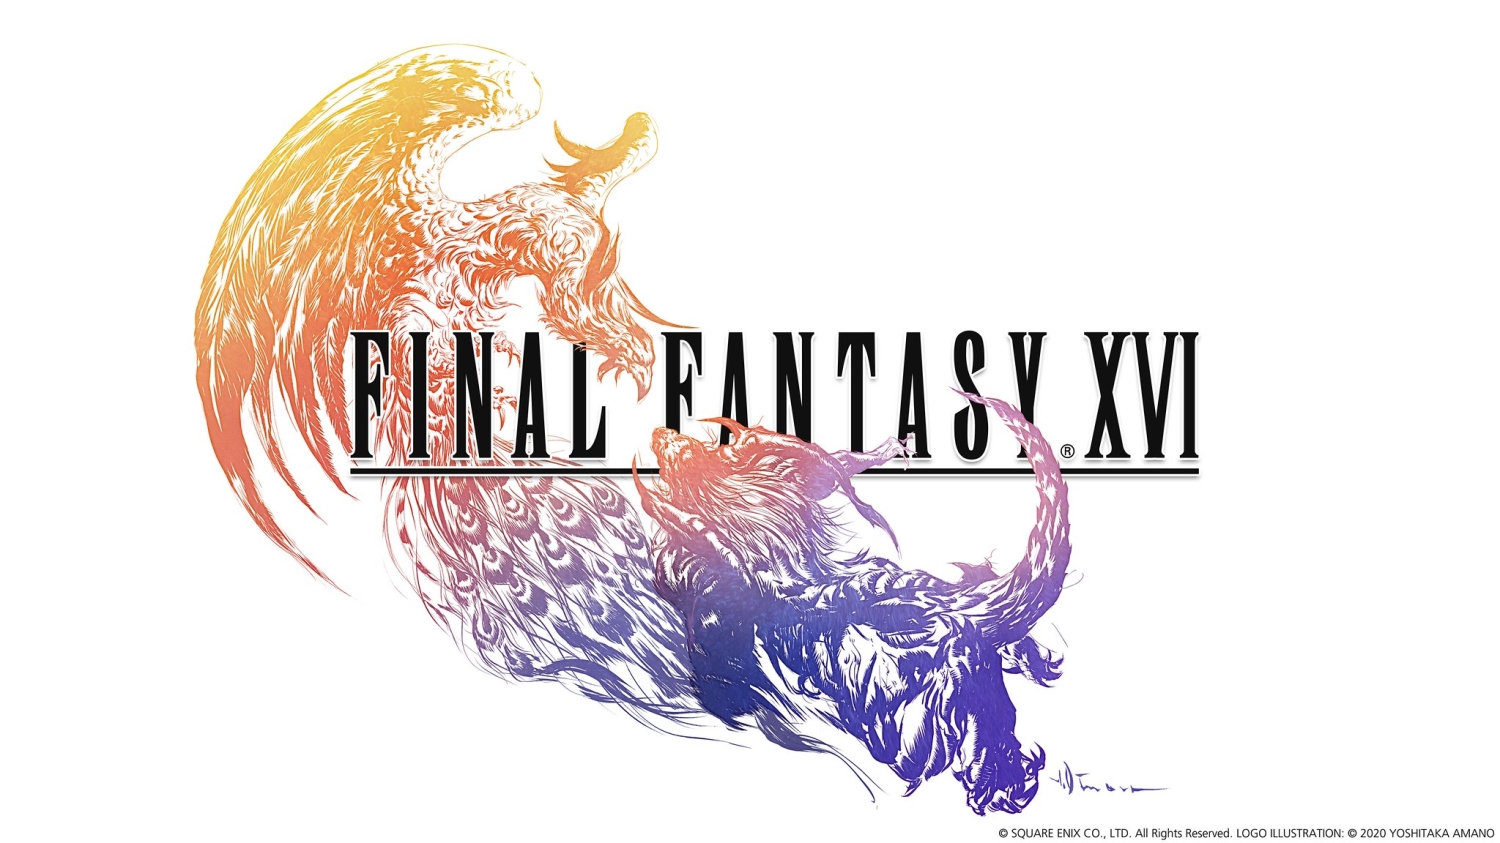 Rumor: Insider Claims Square Enix Is Panicking Over Poor 'Final